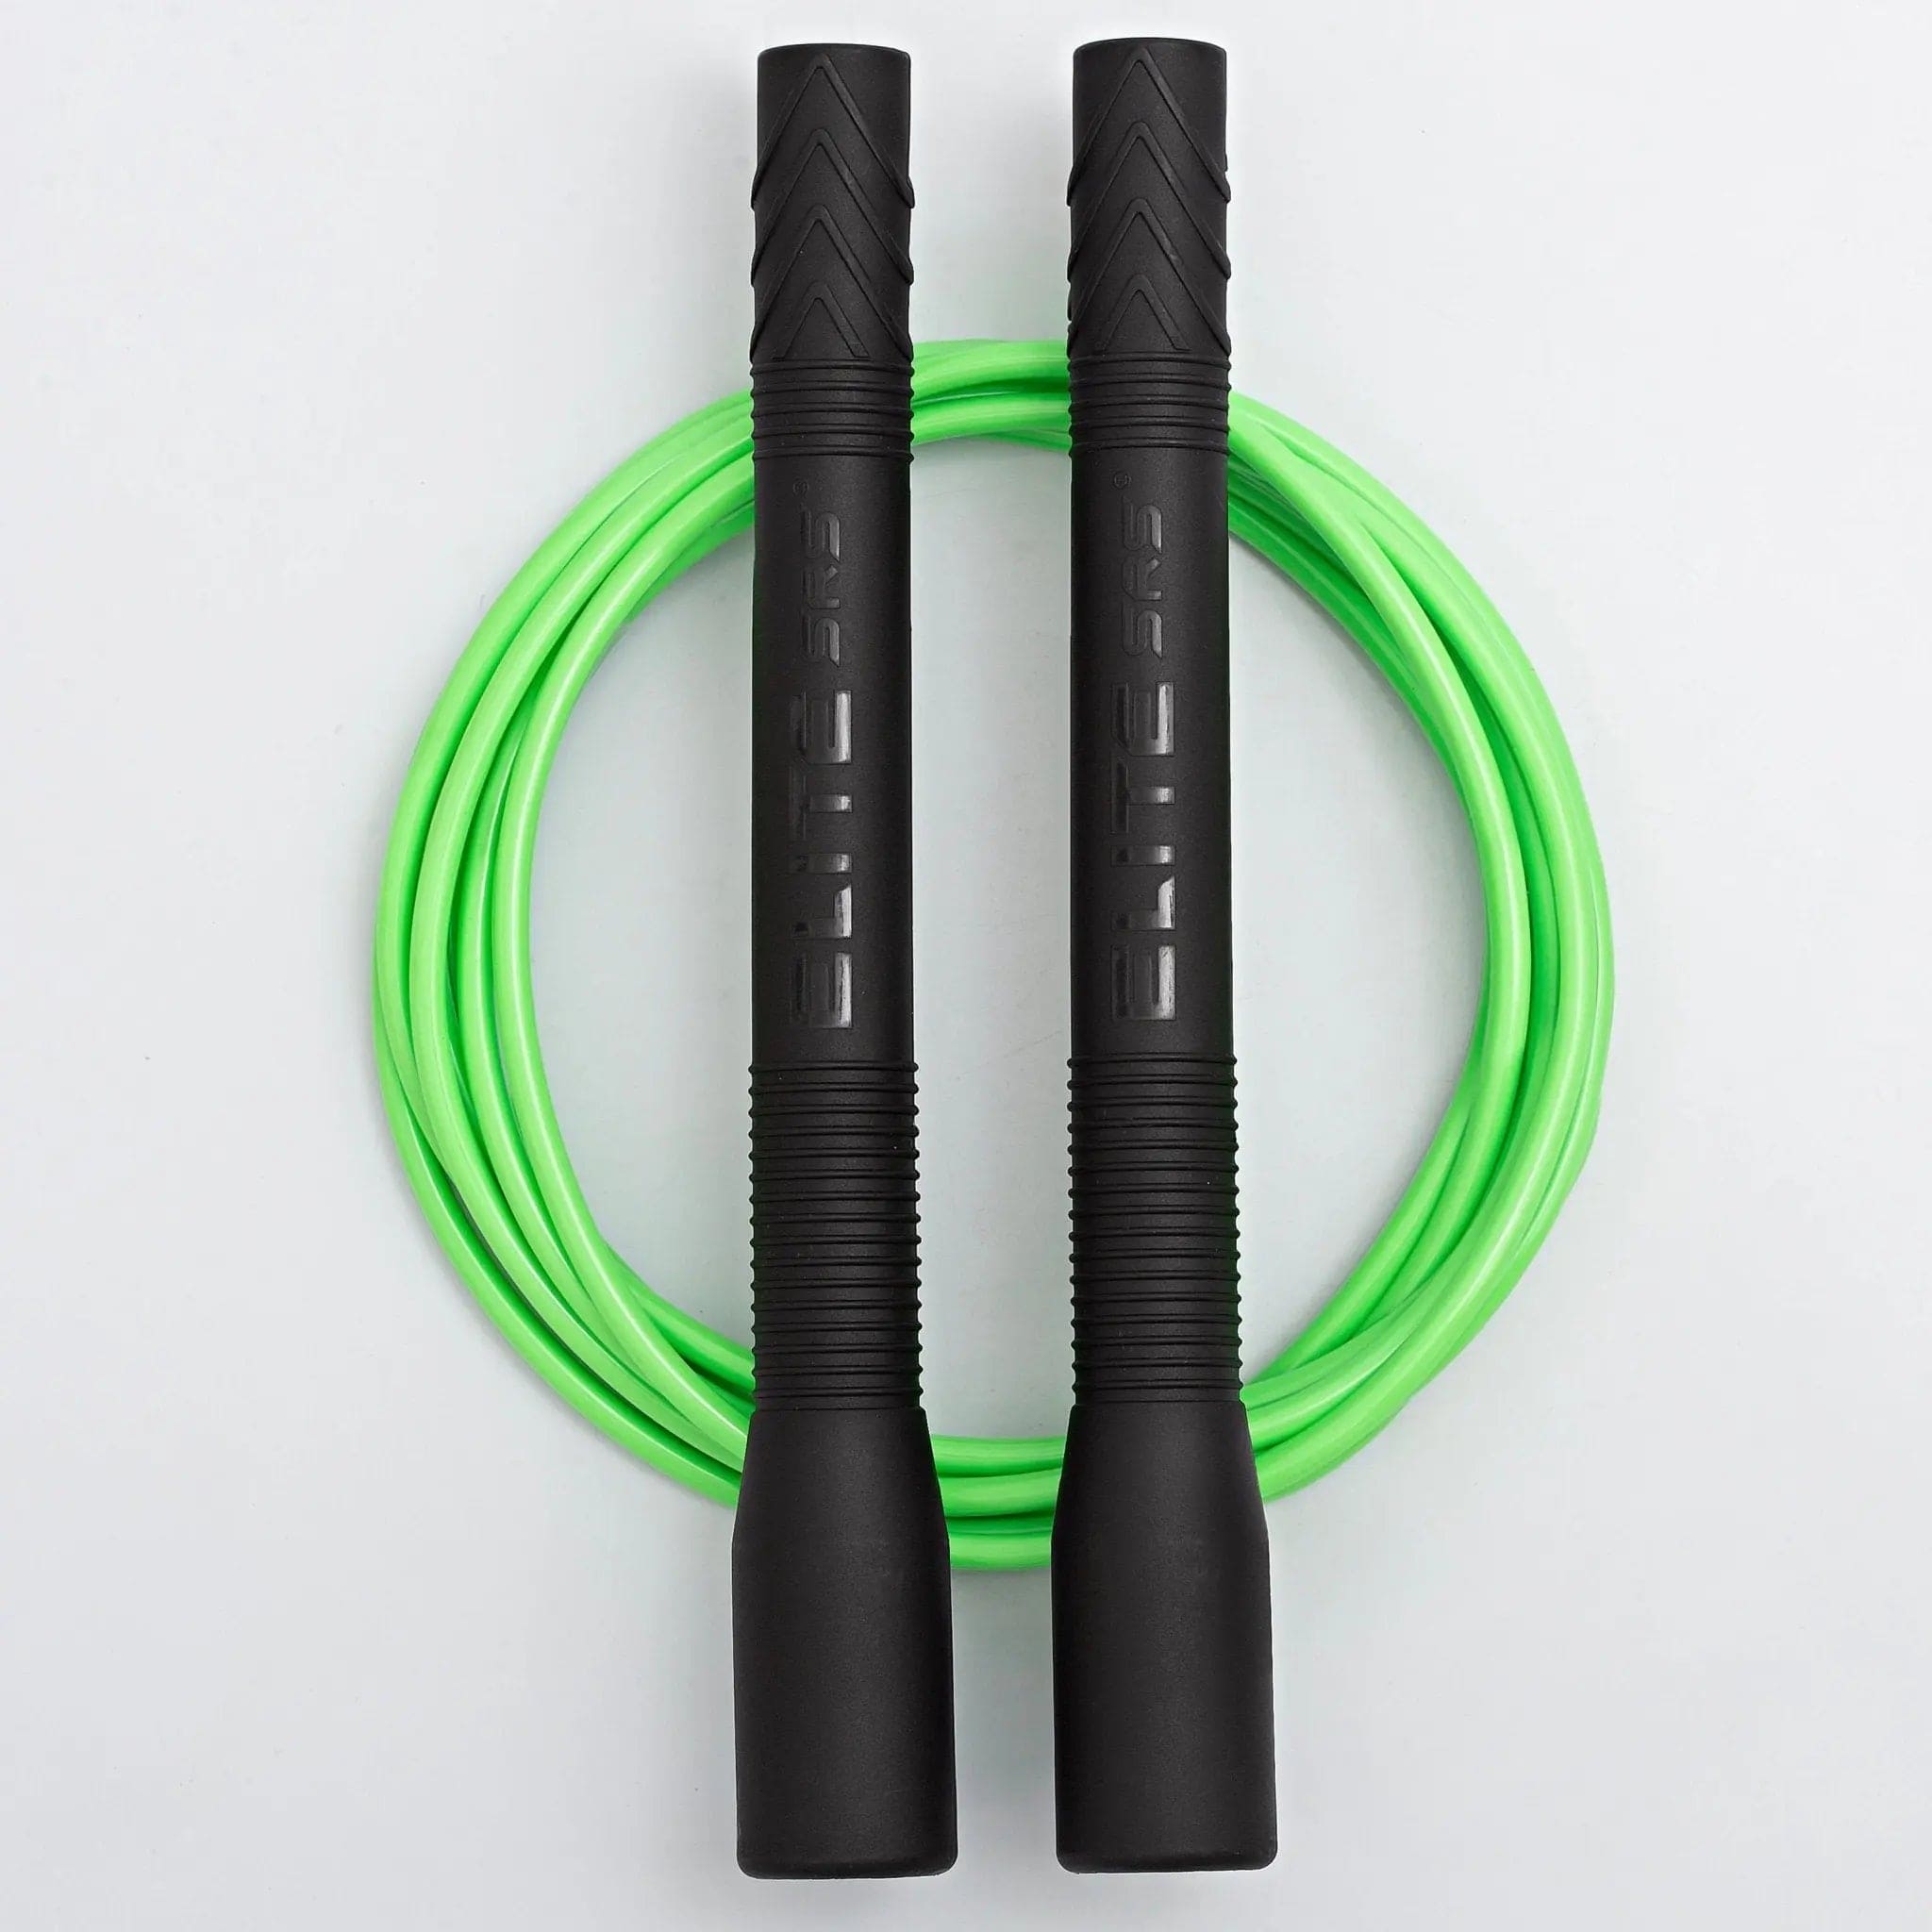  Double Dutch Jump Rope 16 Ft 2 Pack, Long Soft Beaded